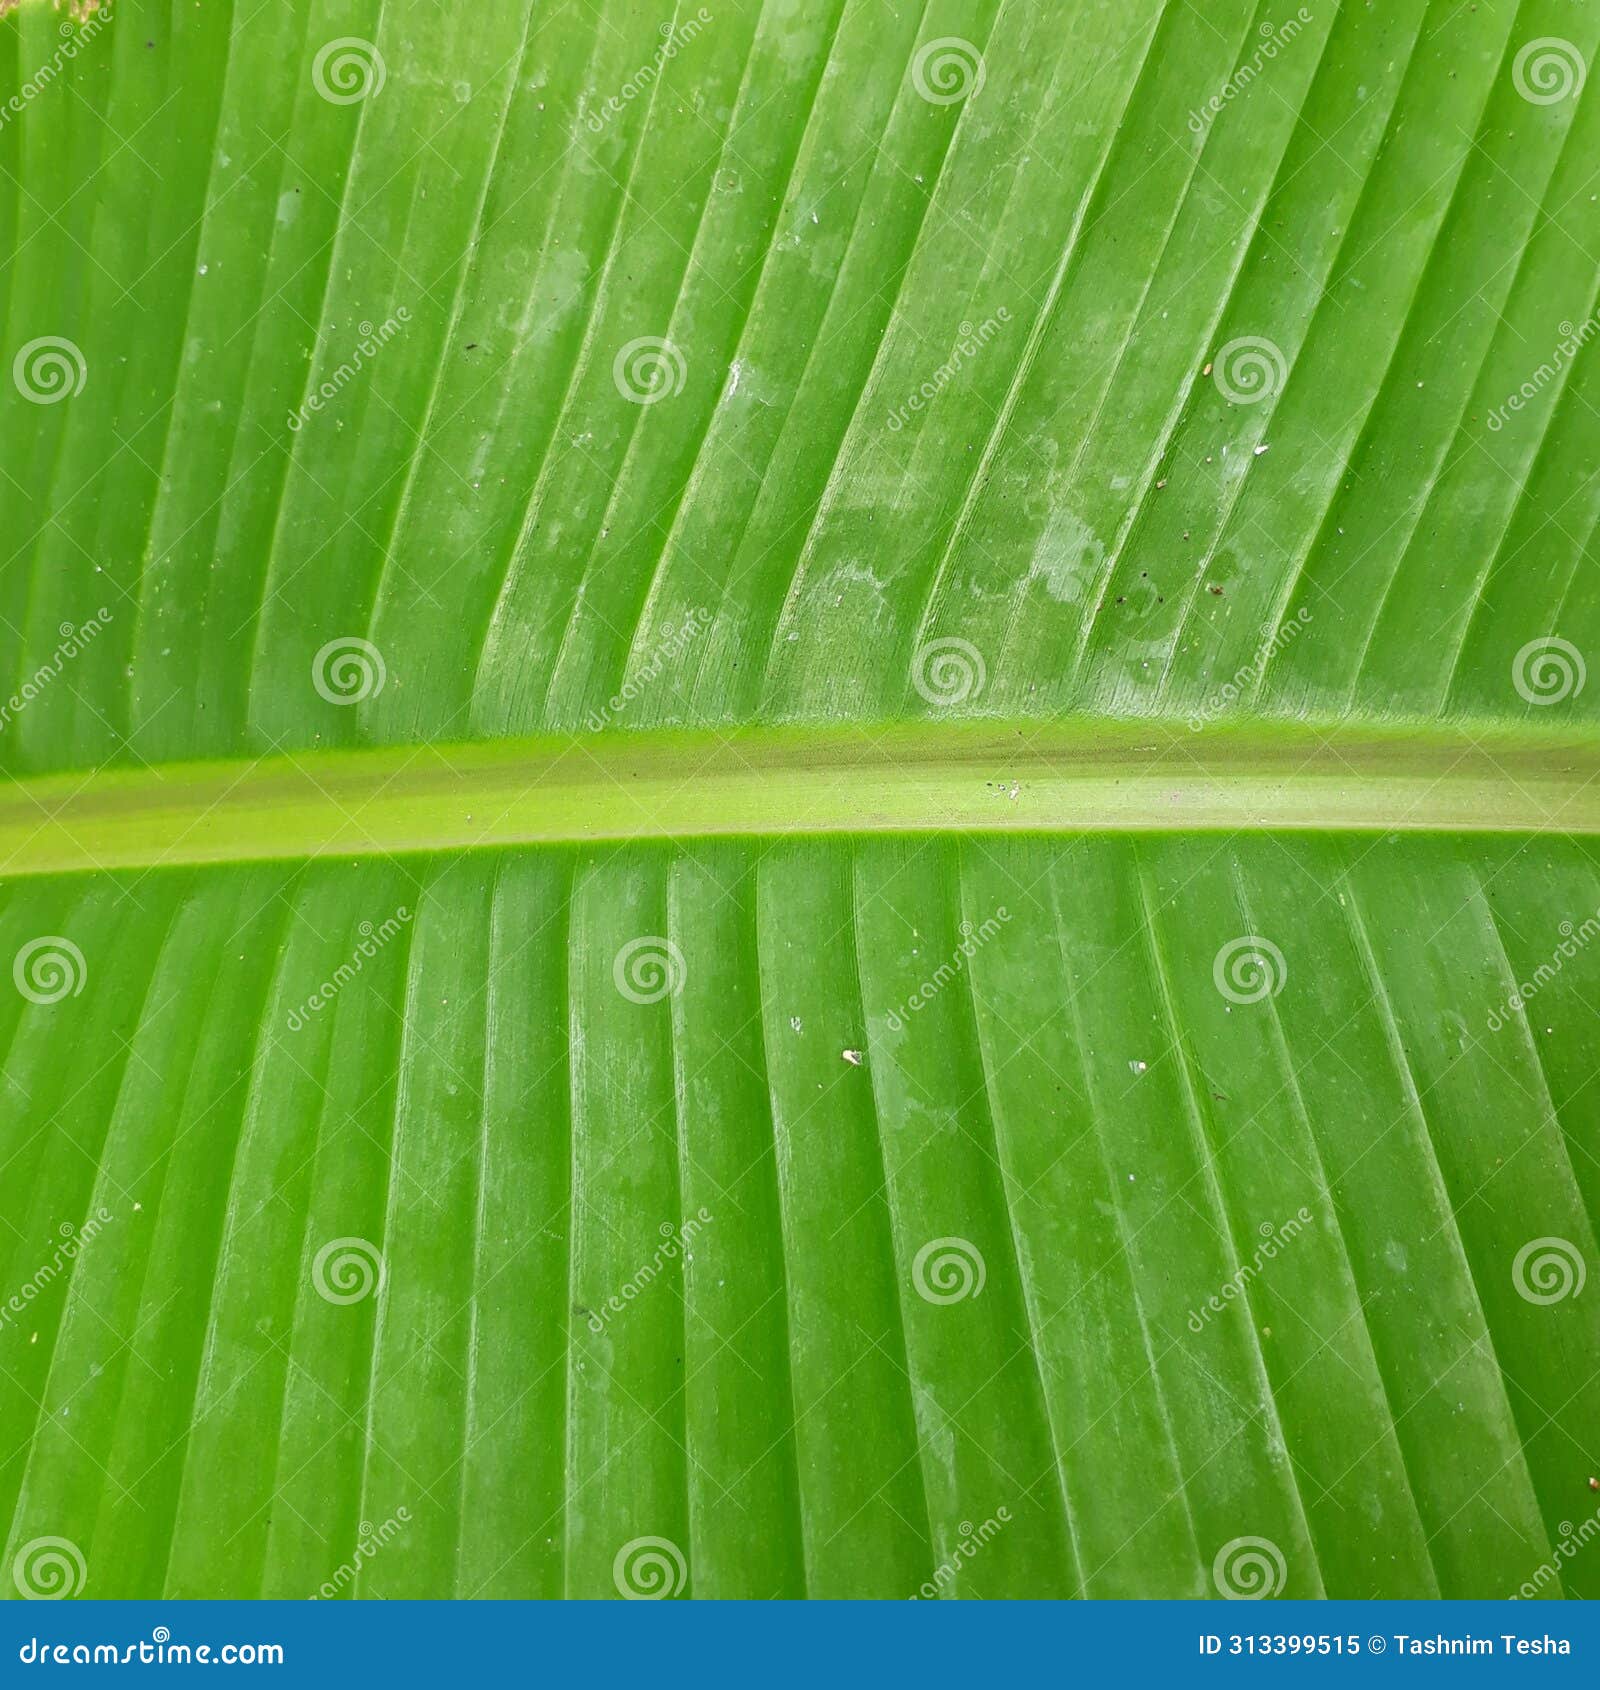 banana trees are tropical and originate in rainforests,